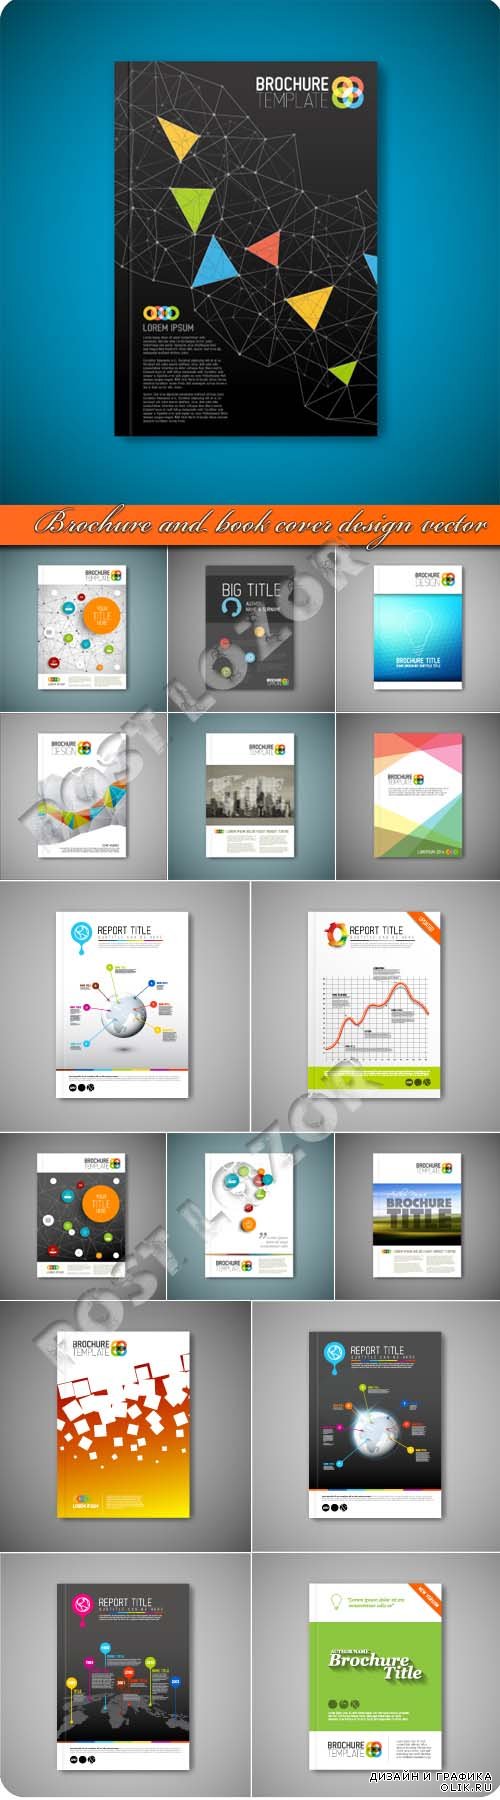 Brochure and book cover design vector